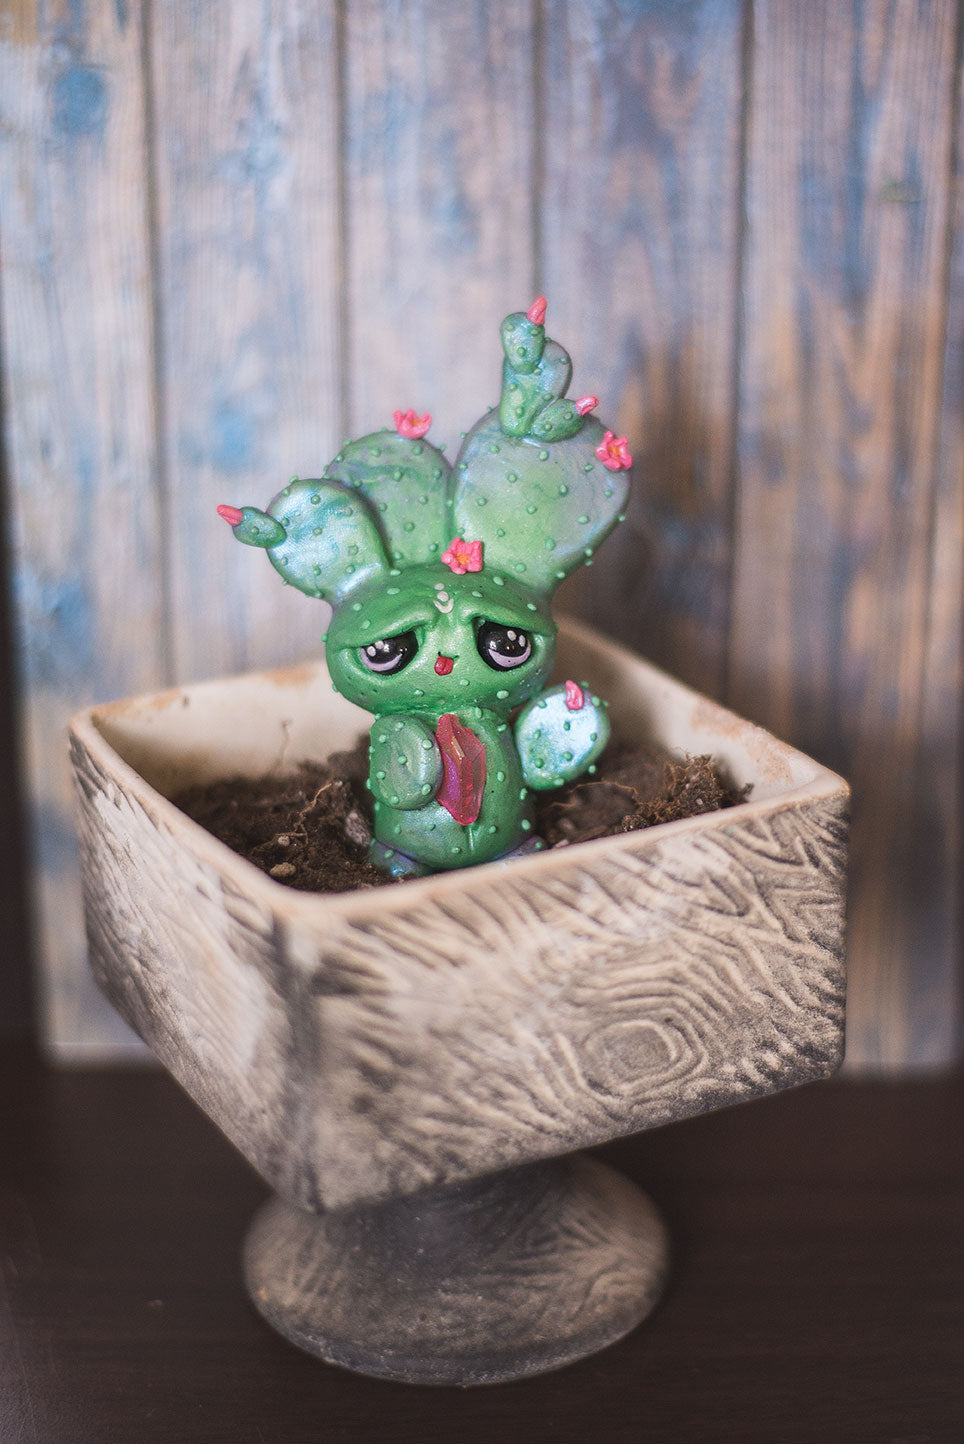 Custom hand sculpted polymer clay green cactus with pink flowers mish in pot holding pink aura quartz